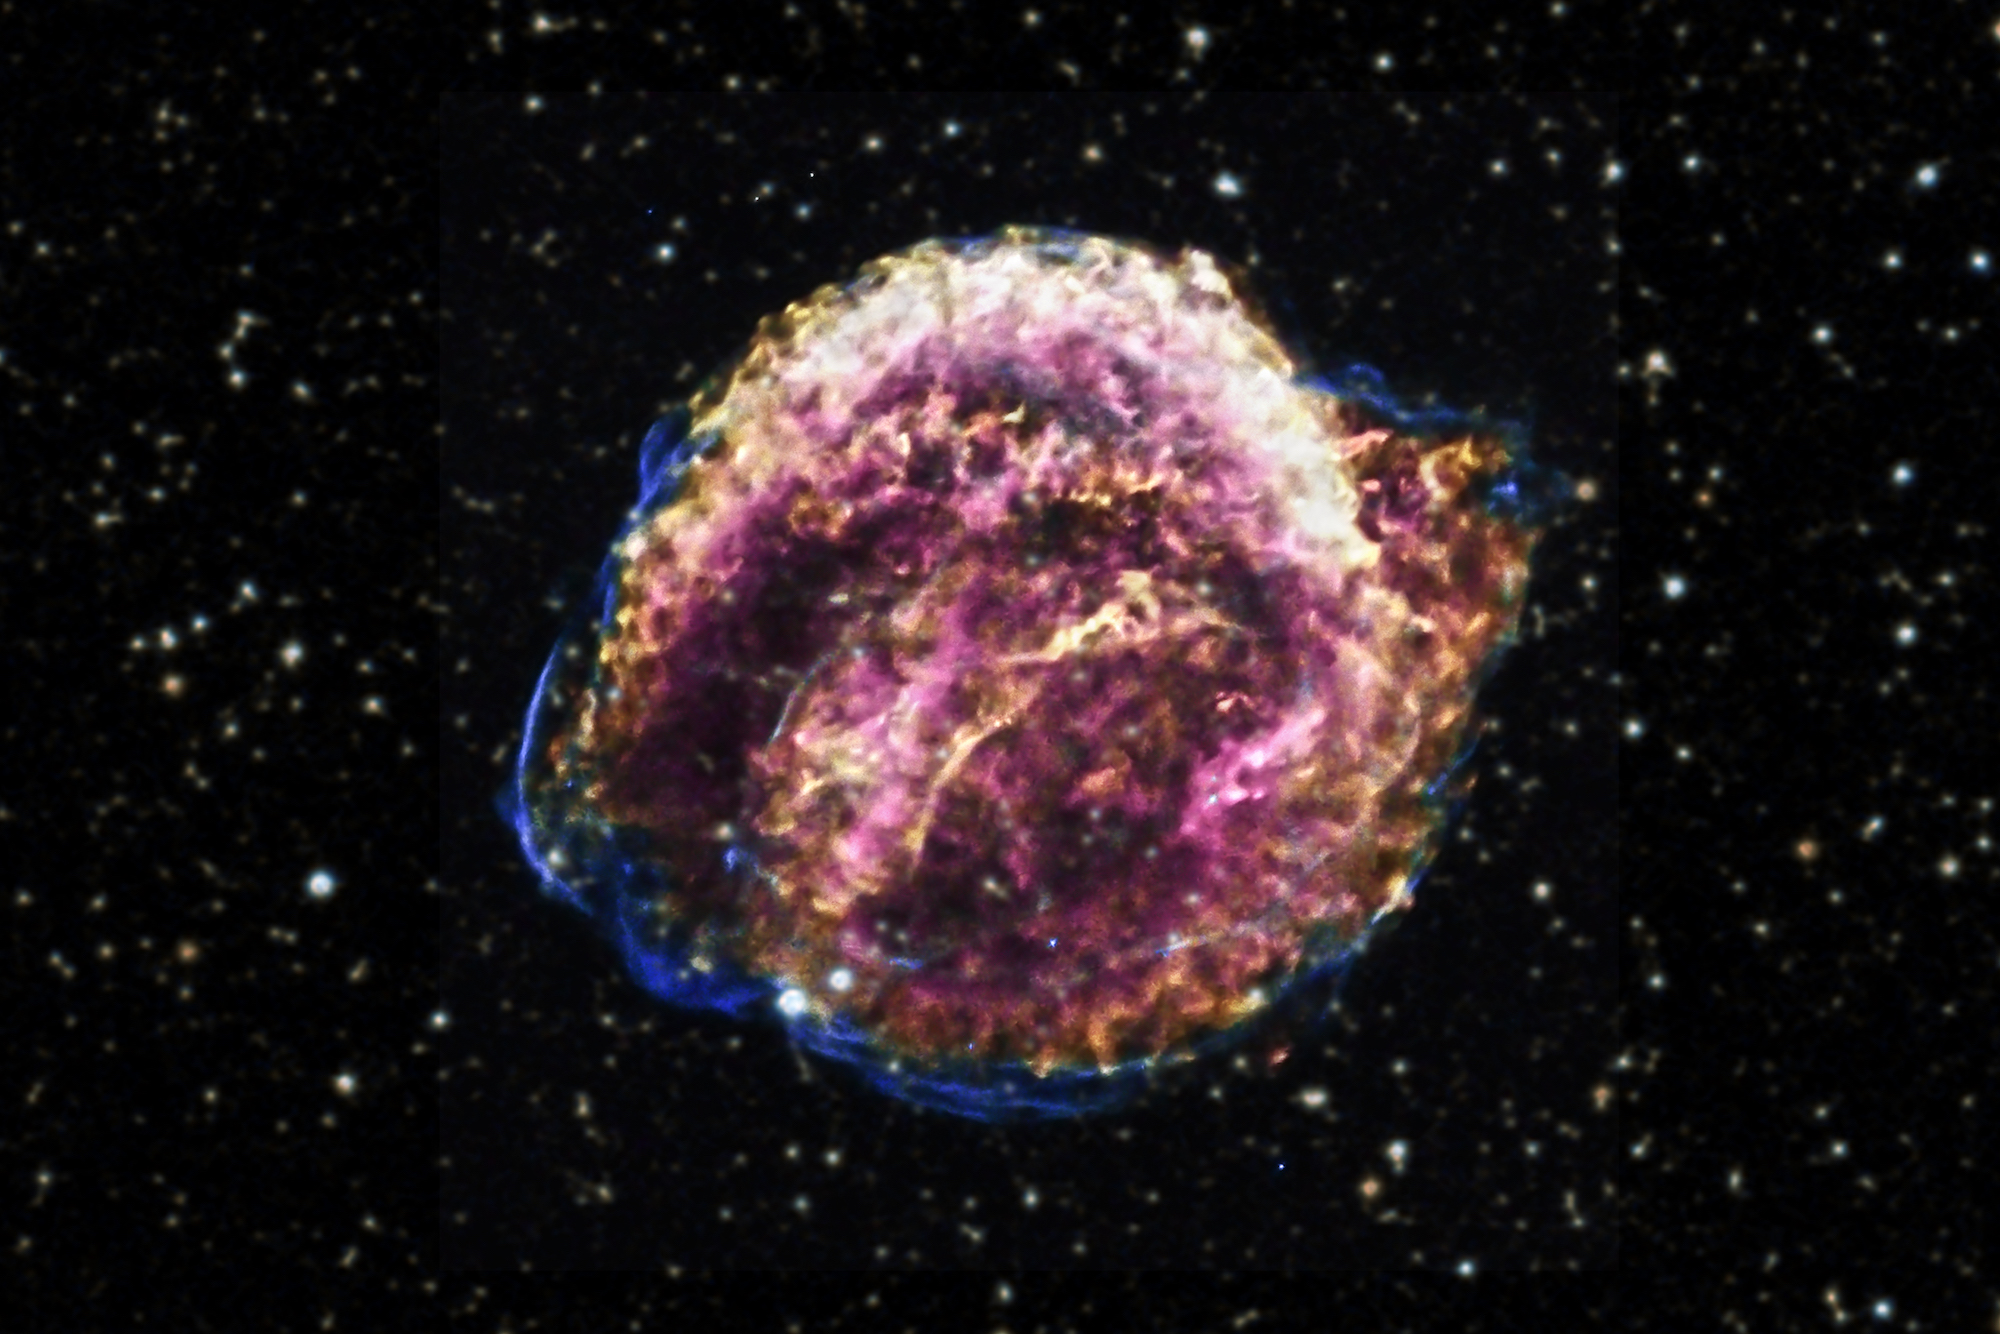 The image is a composite of Kepler's supernova remnant, showing a spherical cloud of debris in purple and pink X-ray wavelengths with a blue optical edge, set against a starry black space background.